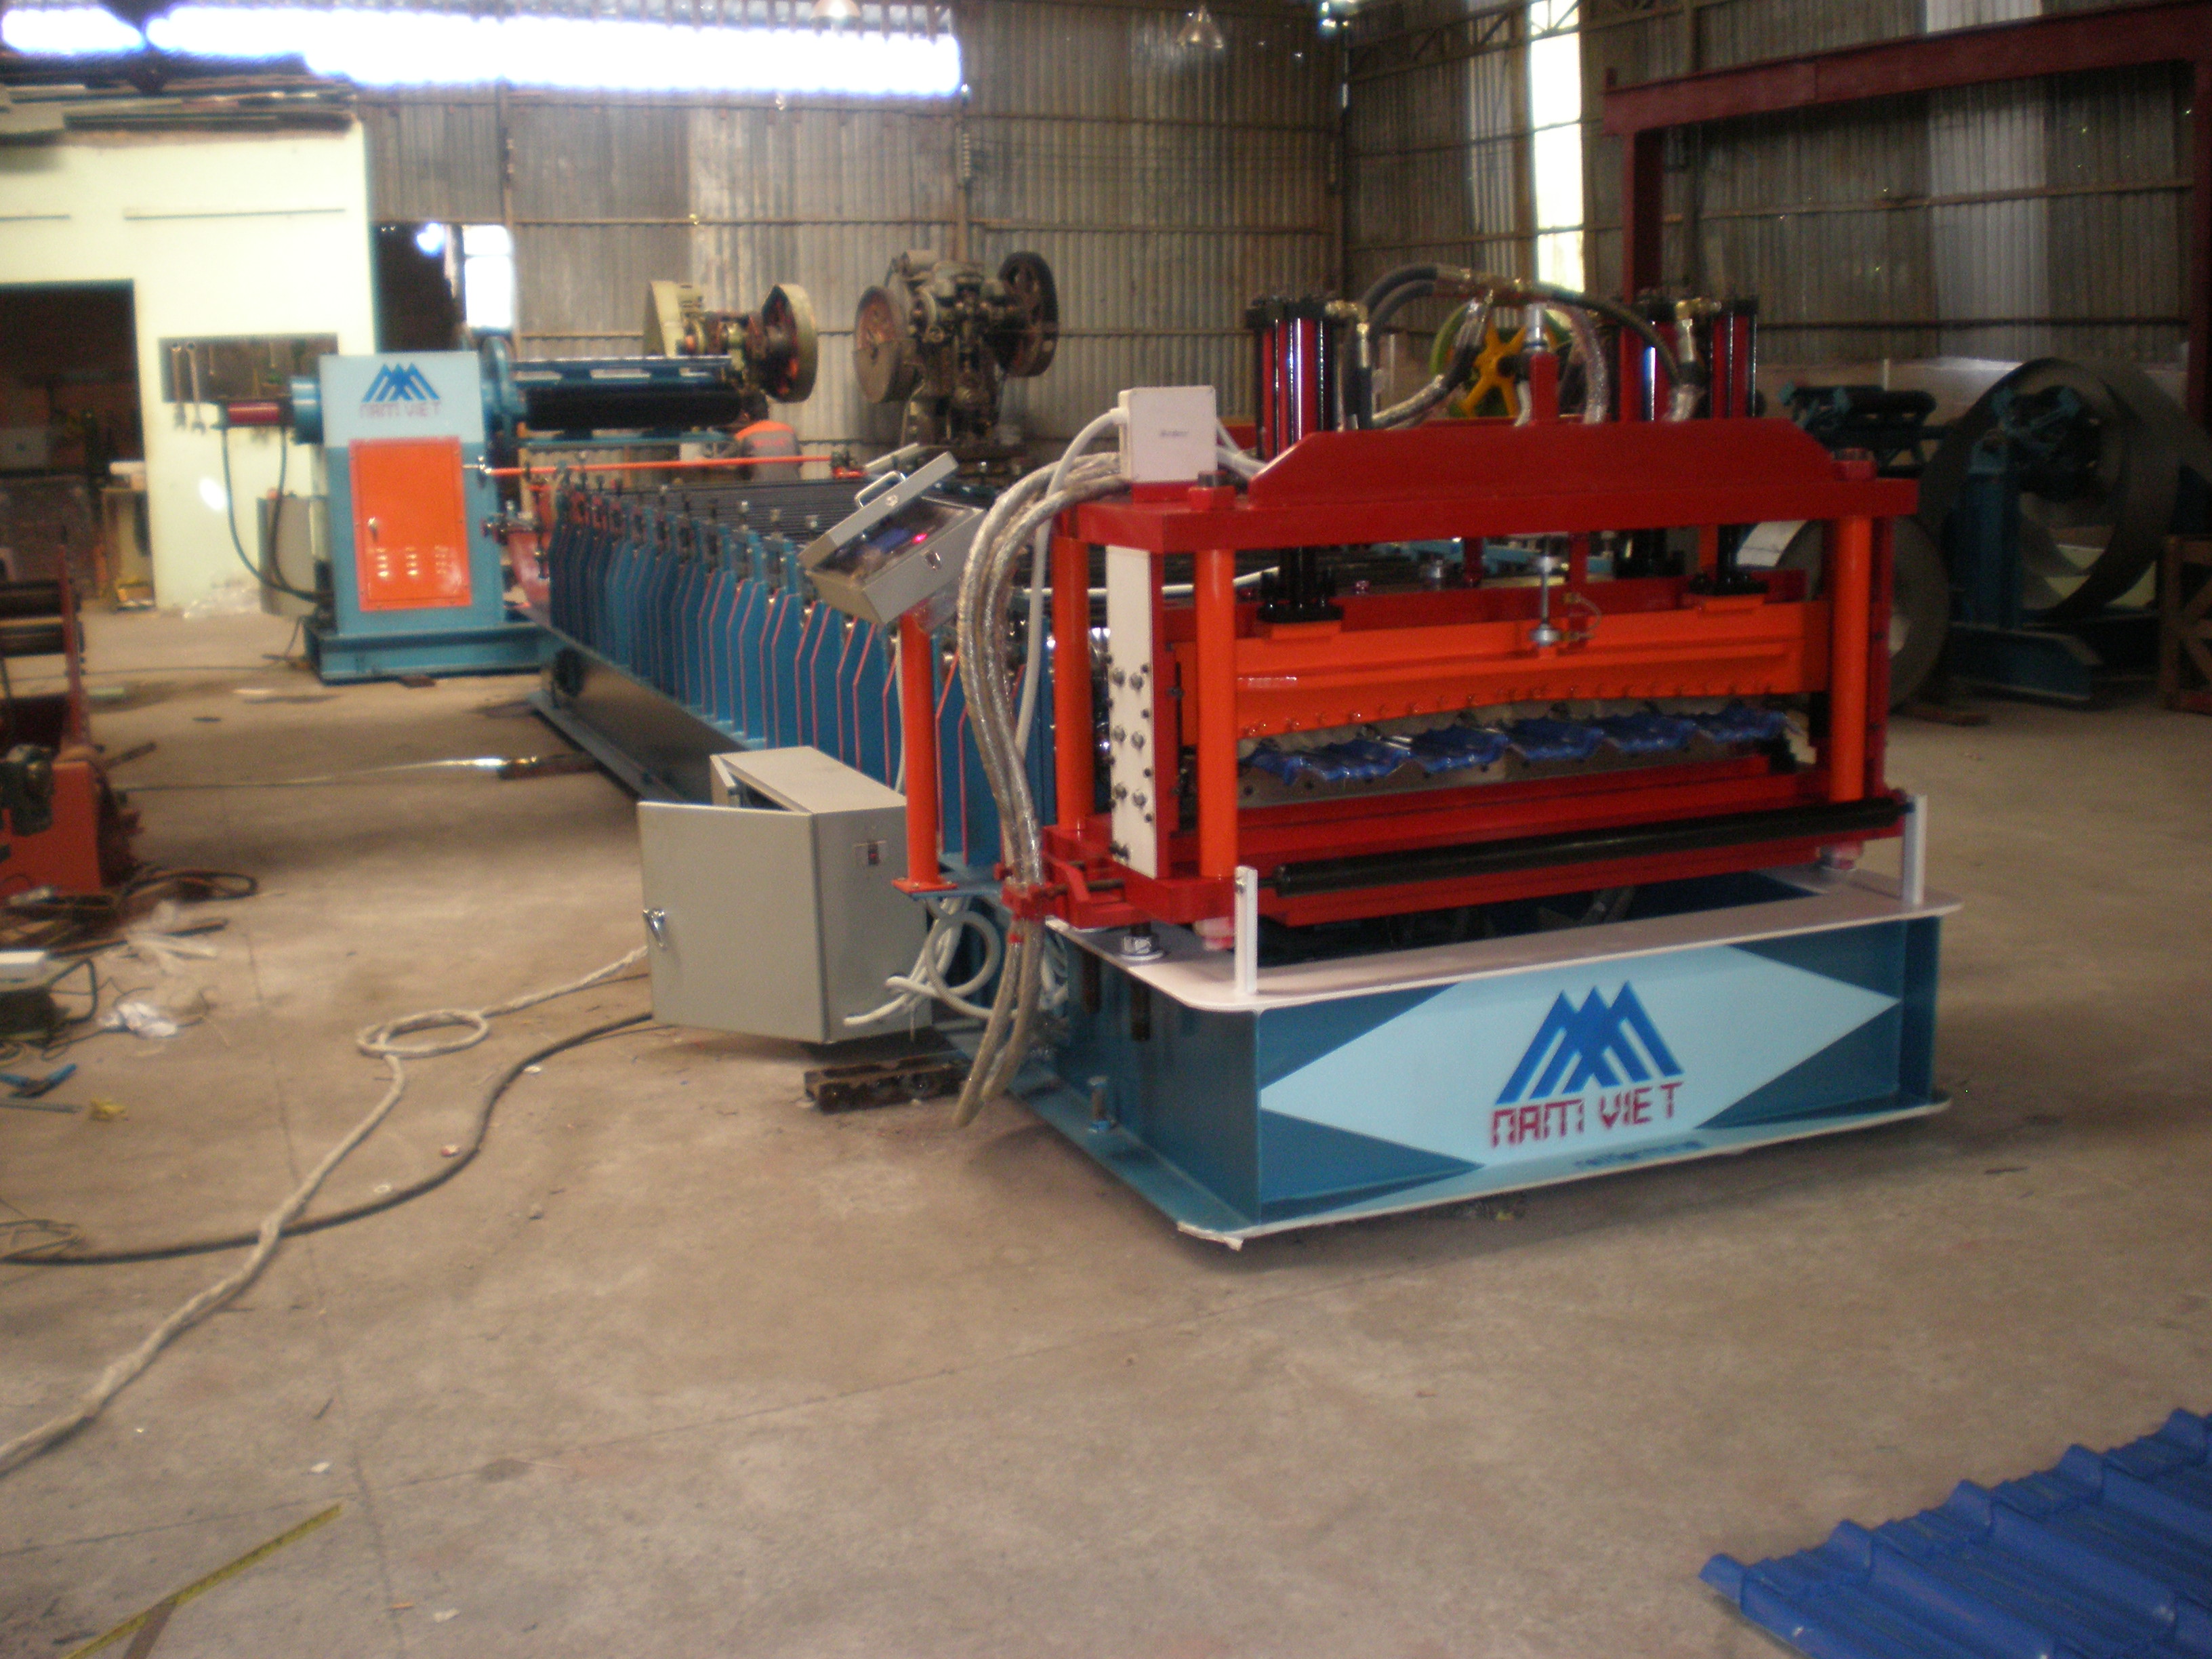 STEP TILE ROLL FORMING MACHINE